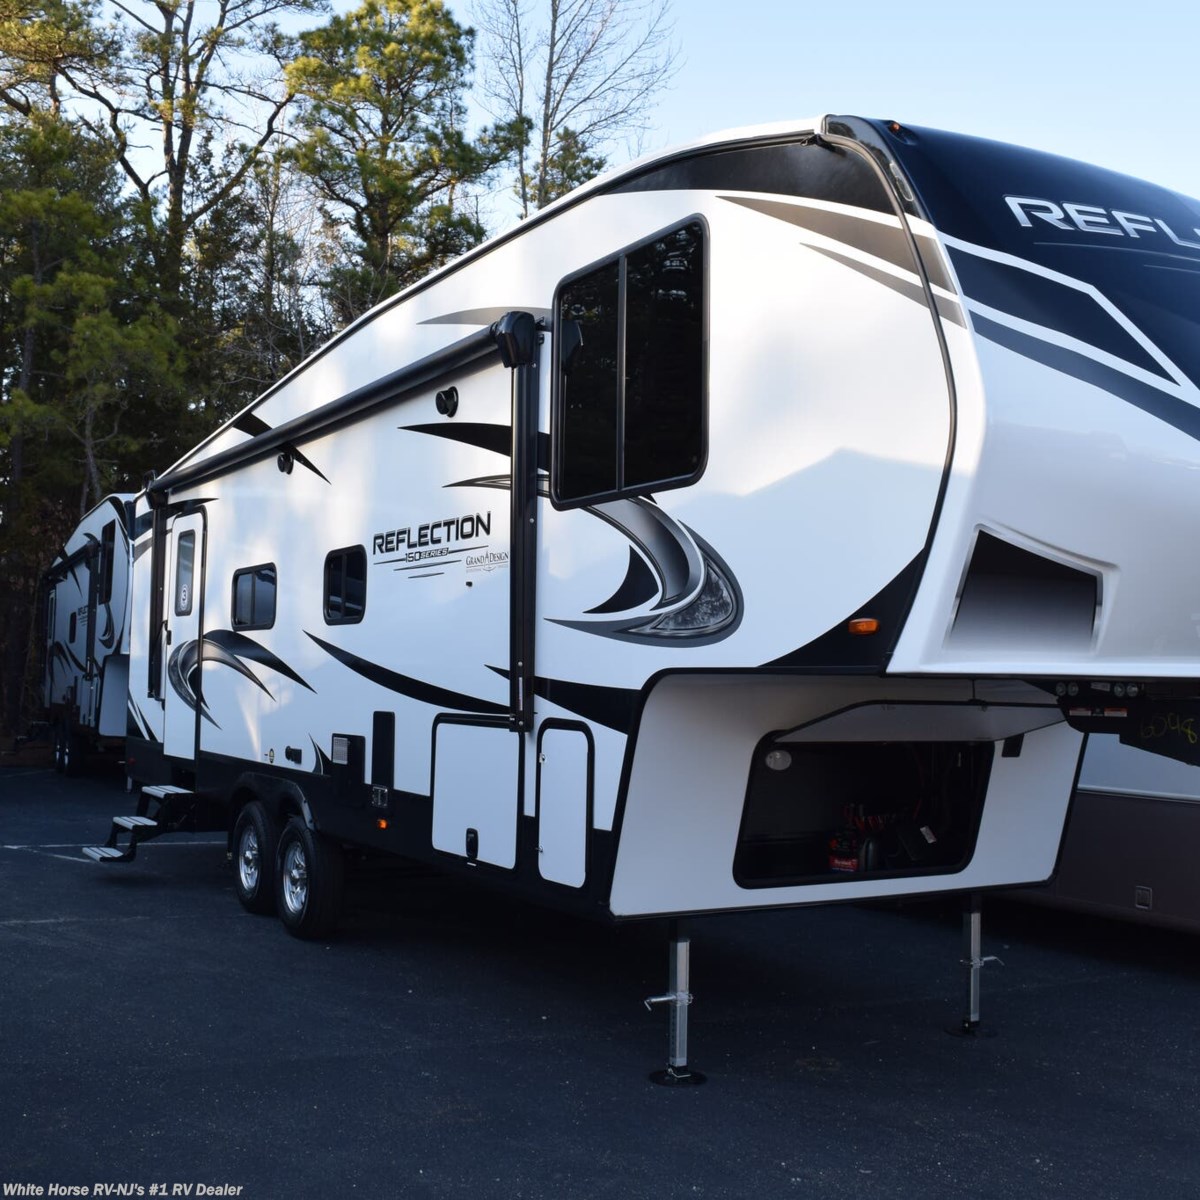 Re34 Grand Design Reflection 150 Series 268bh Fifth Wheel For Sale In Egg Harbor City Nj